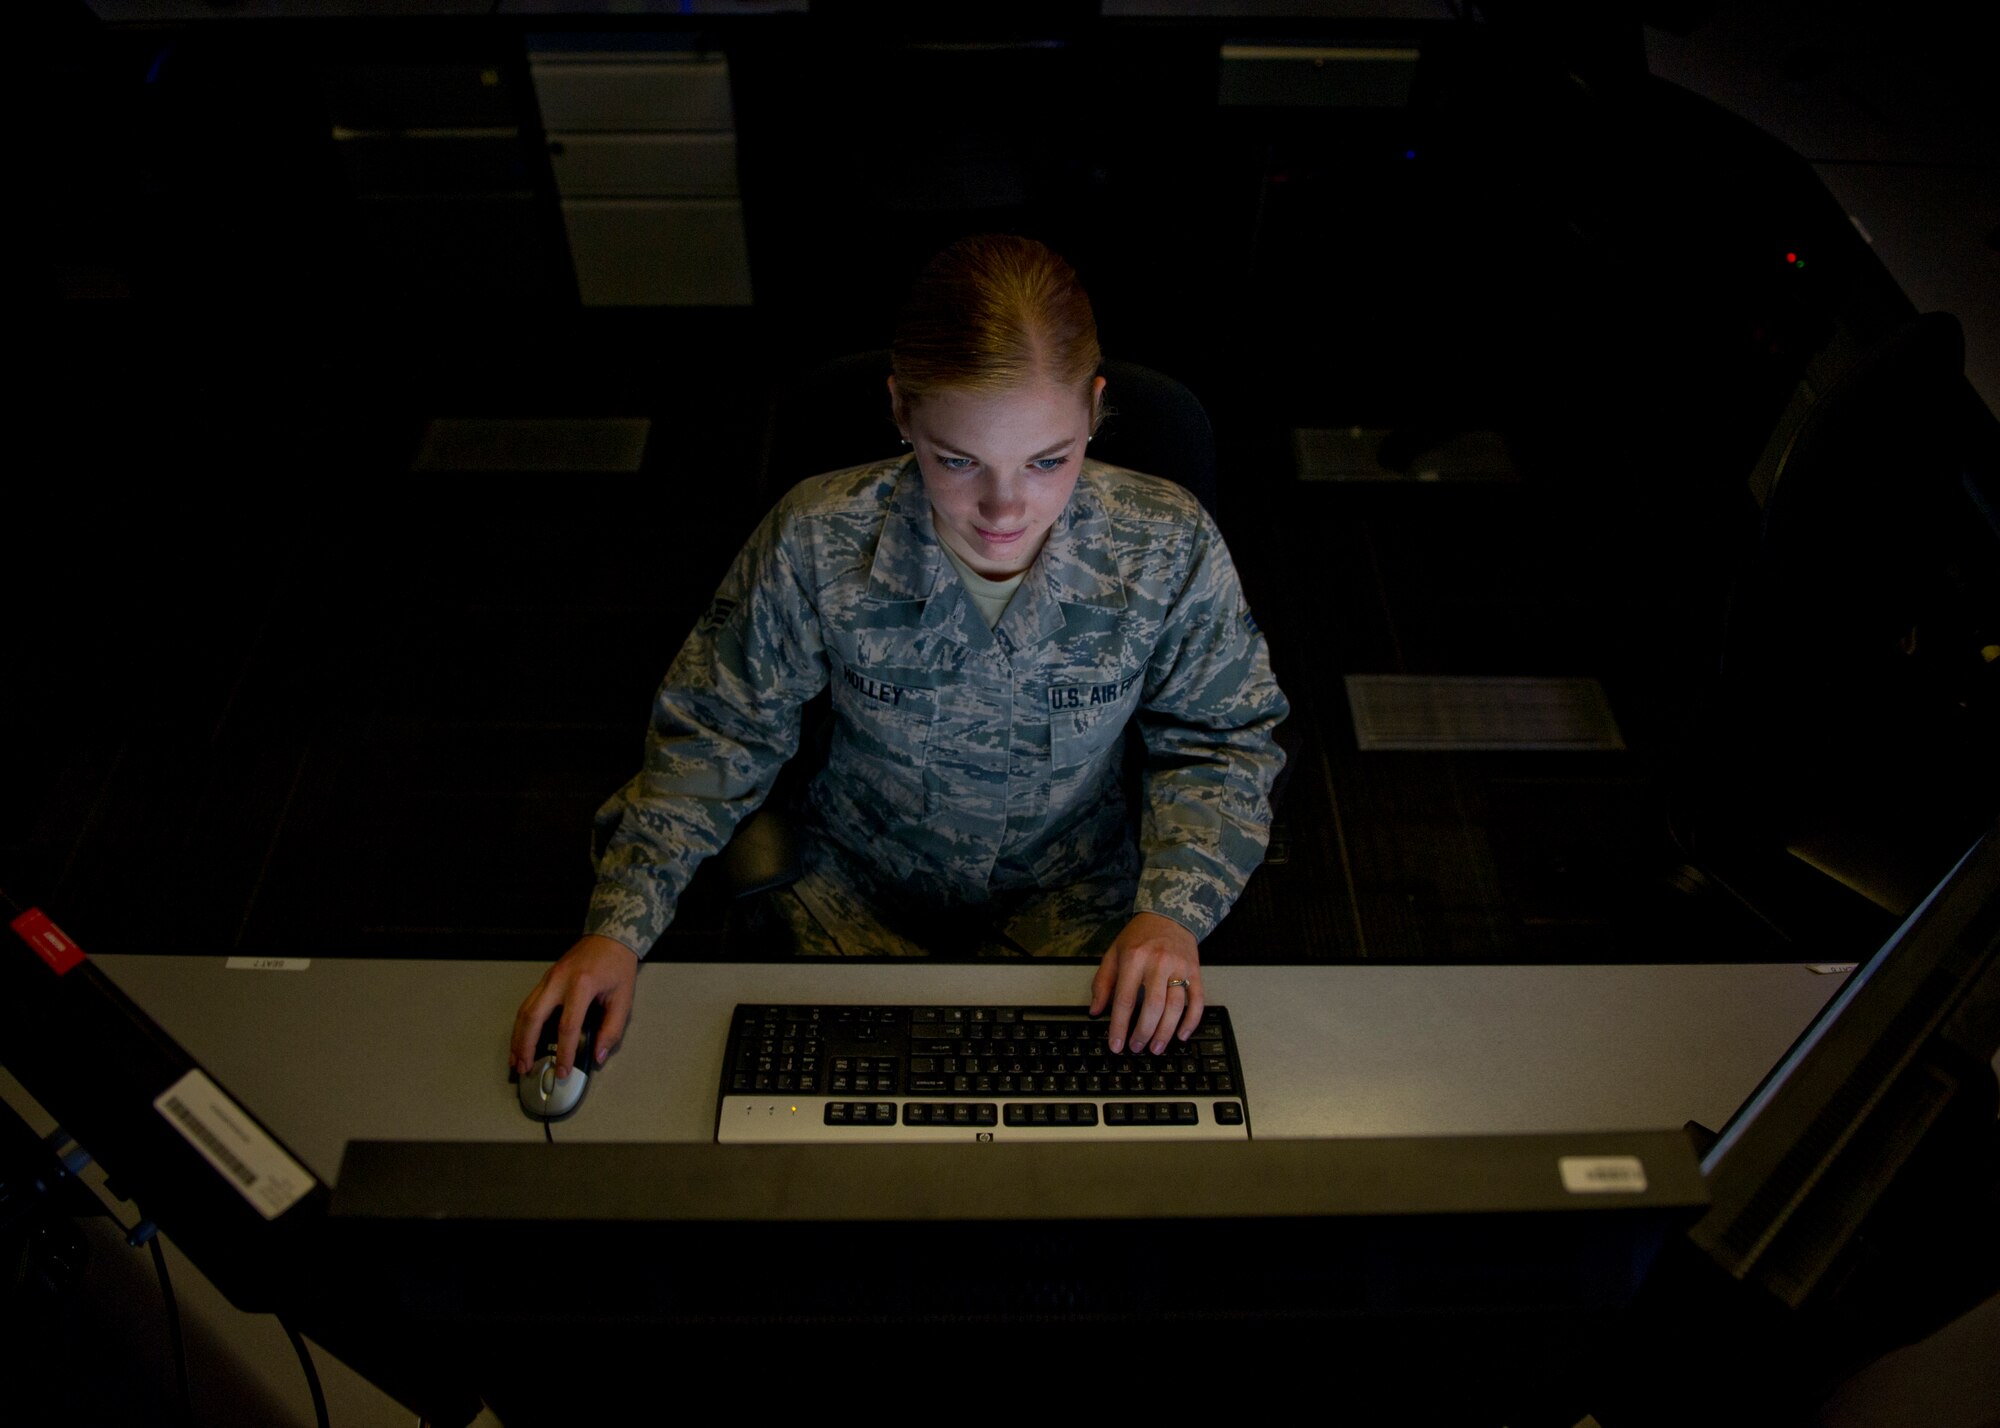 Senior Airman Meaghan Holley conducts mission operations June 30, 2015. Holley was named one of the 12 Outstanding Airmen of the Year in an announcement from the Air Force Personnel Center Monday, July 27, 2015. 